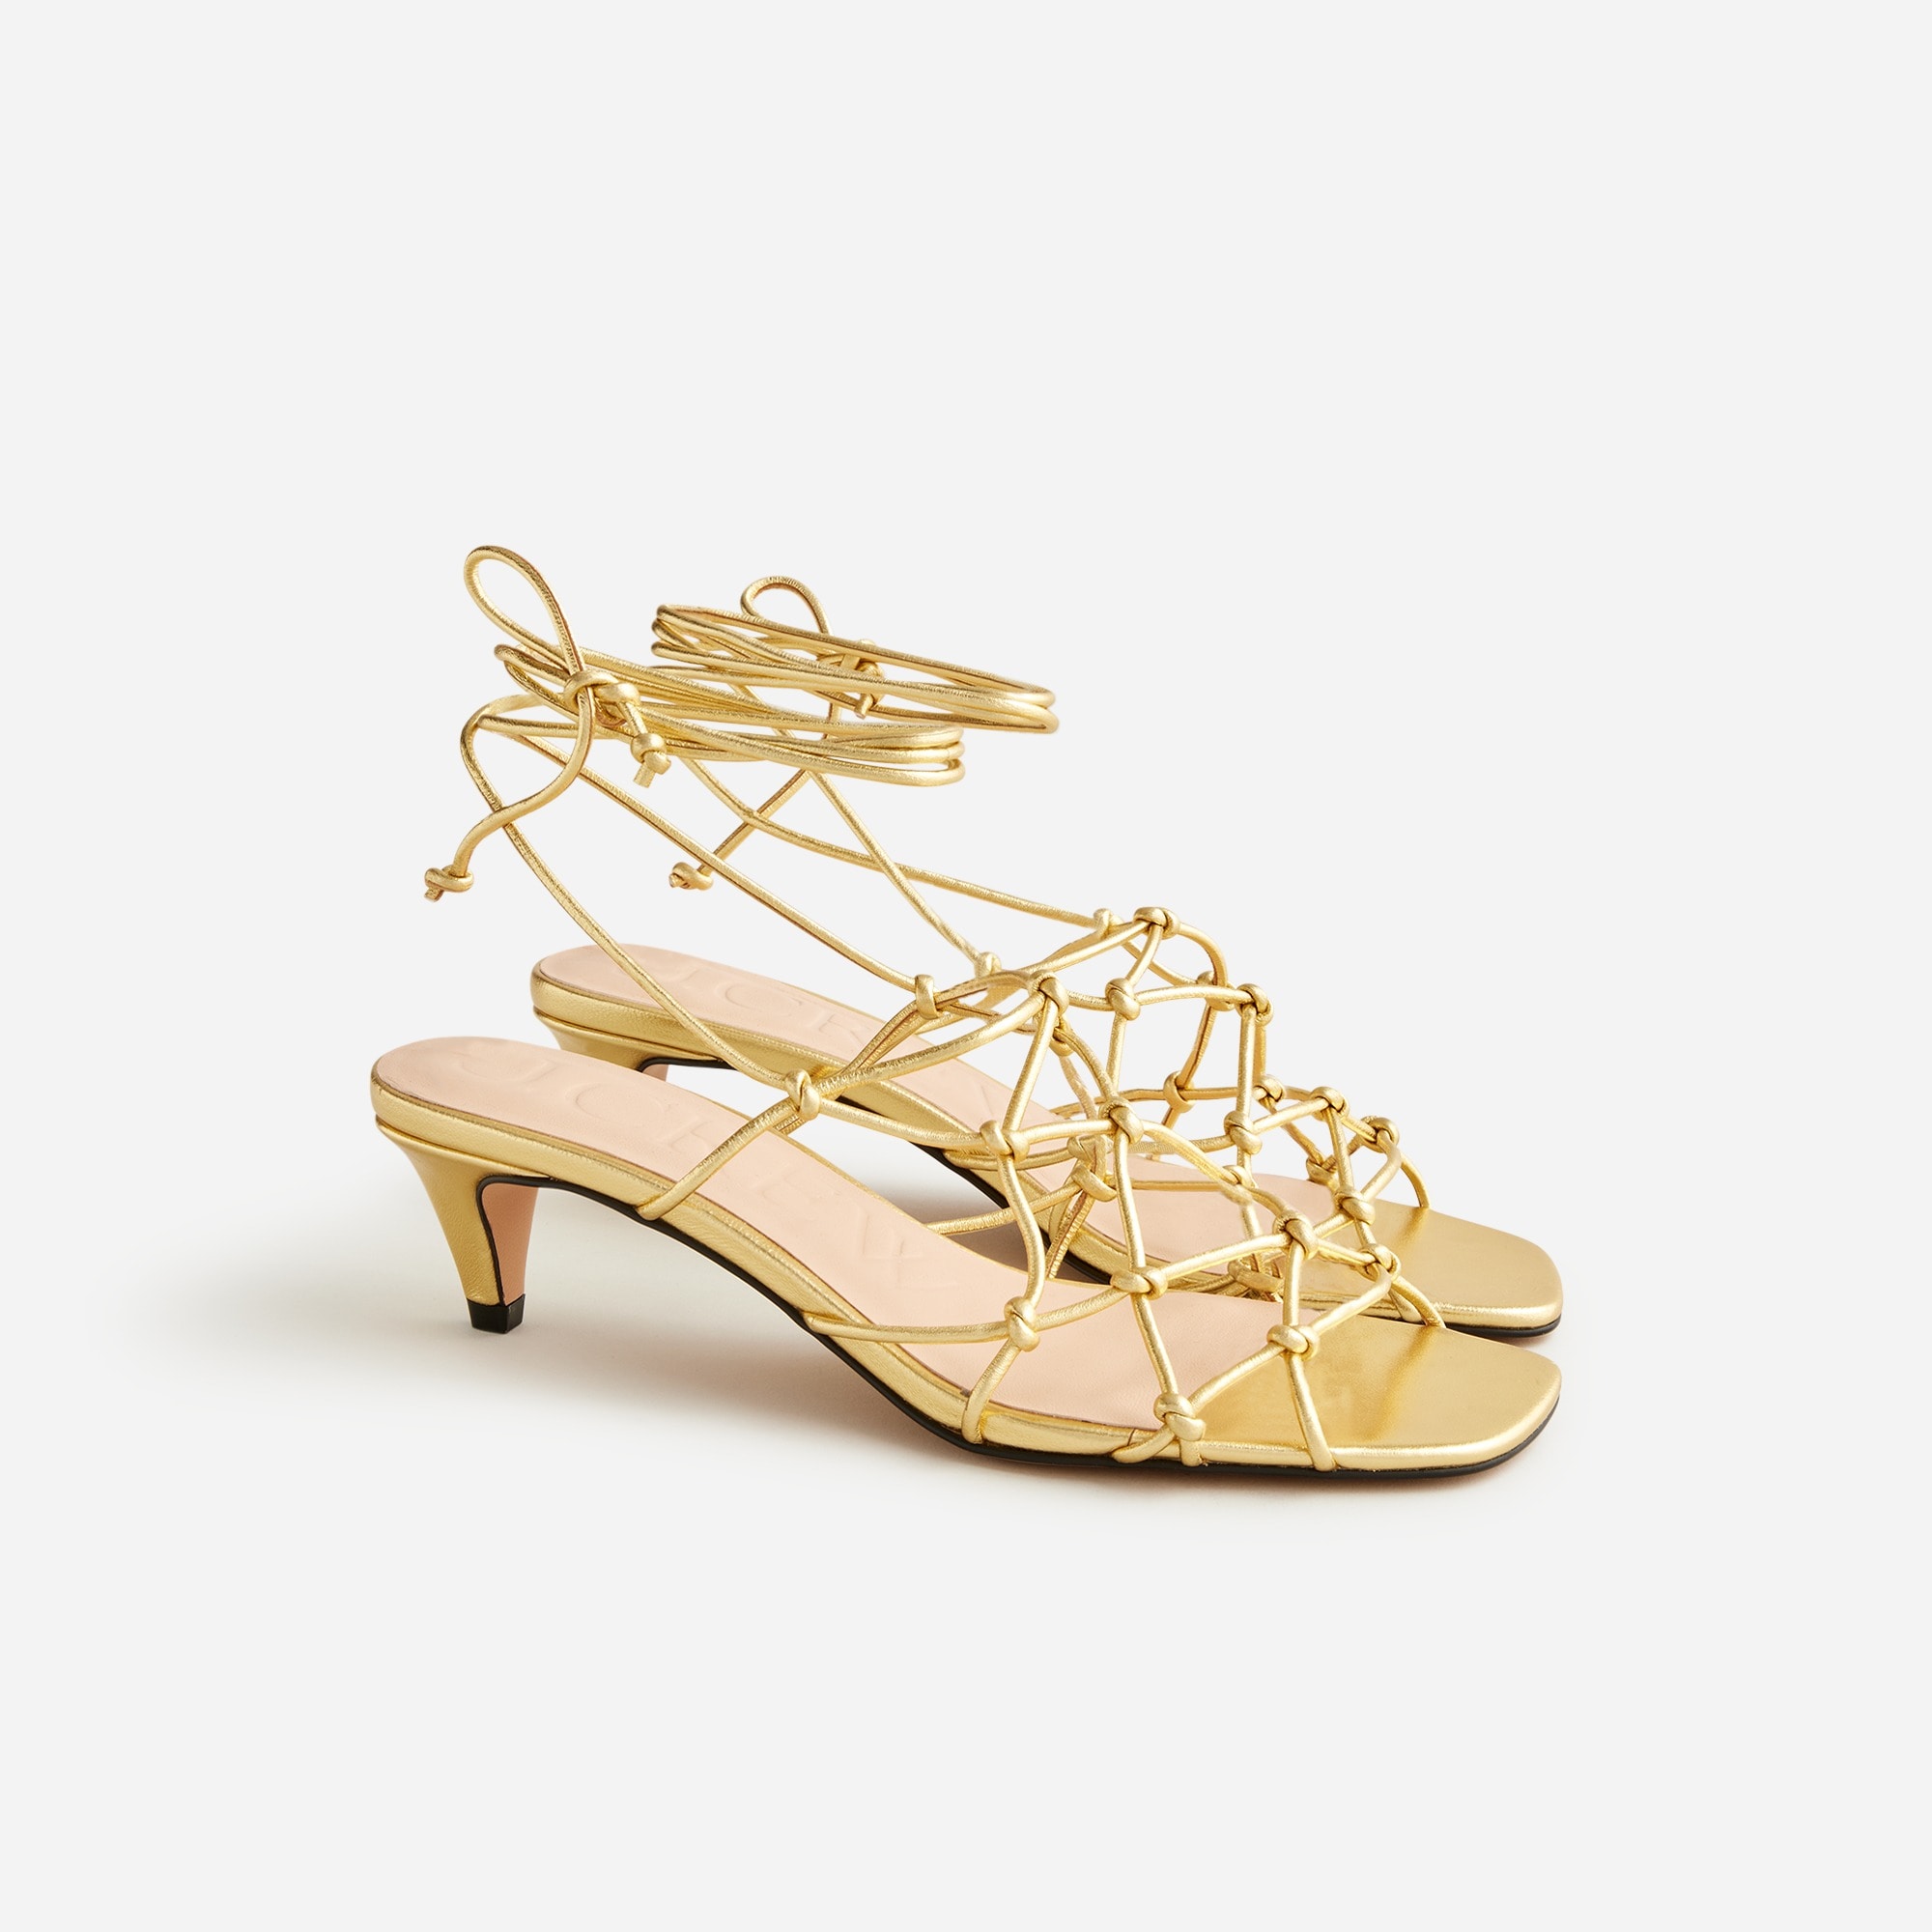  Zadie knotted lace-up kitten heels in metallic leather